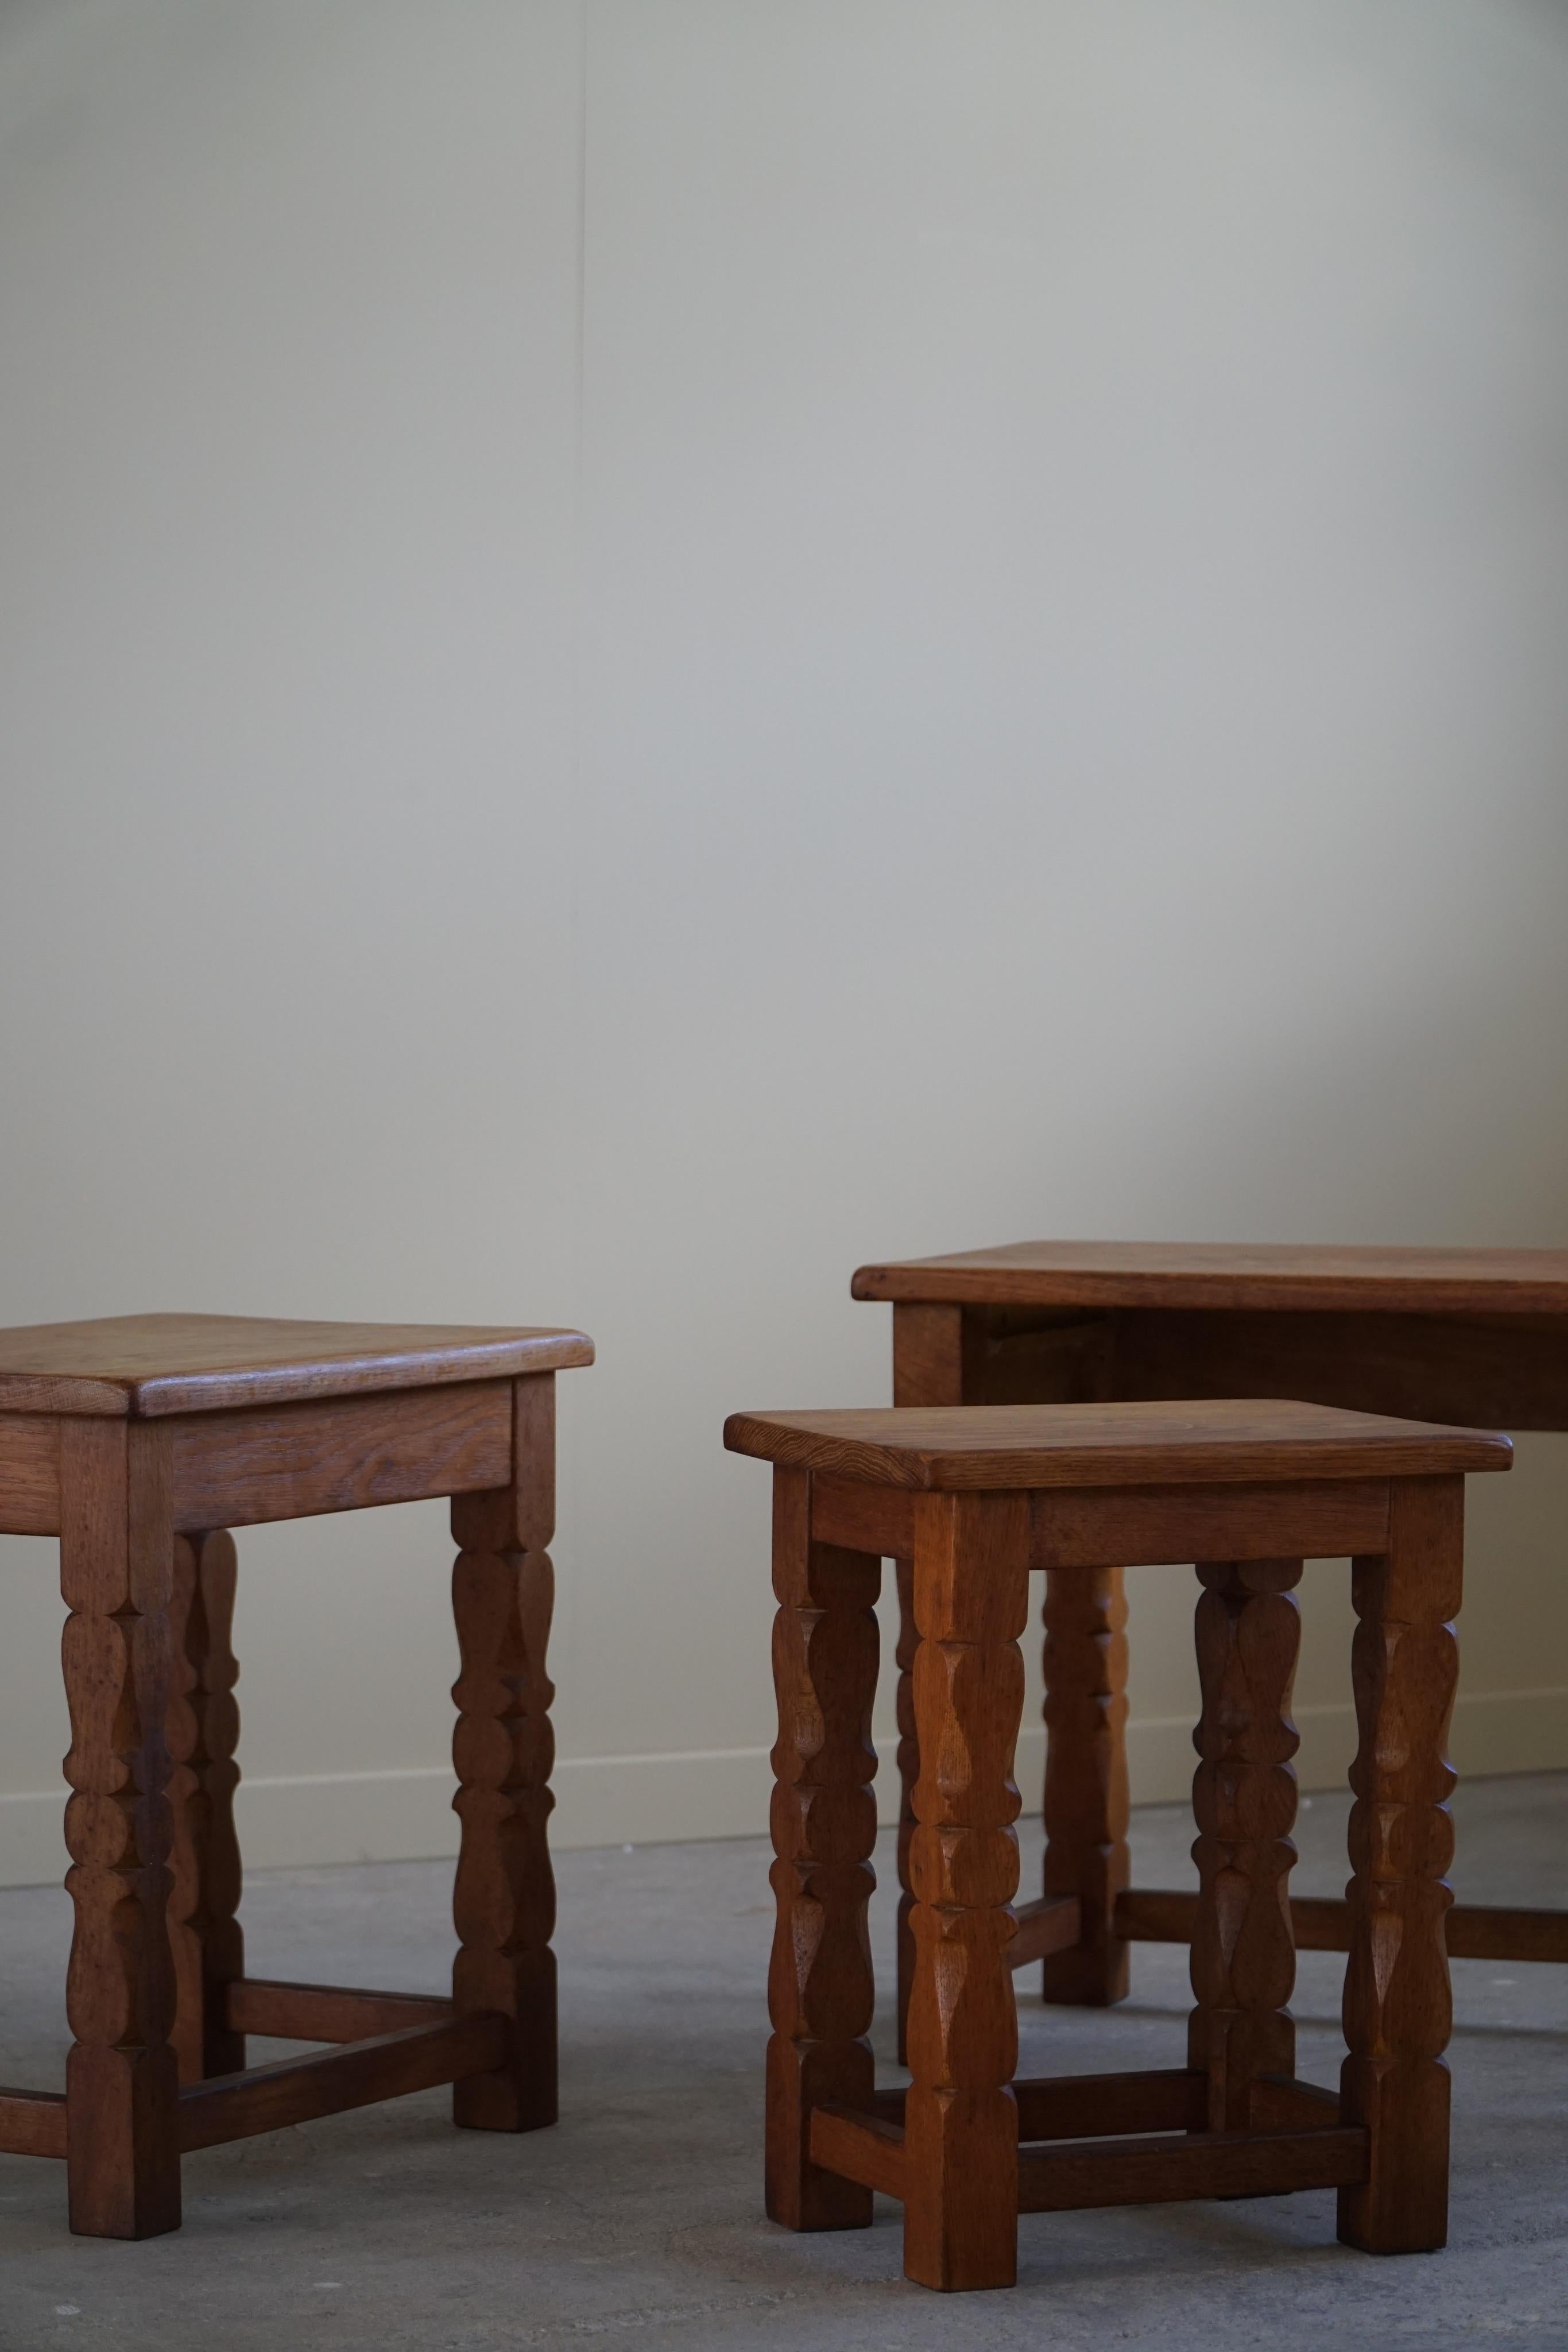 20th Century Nesting Tables in Solid Oak by a Danish Cabinetmaker, 1960s